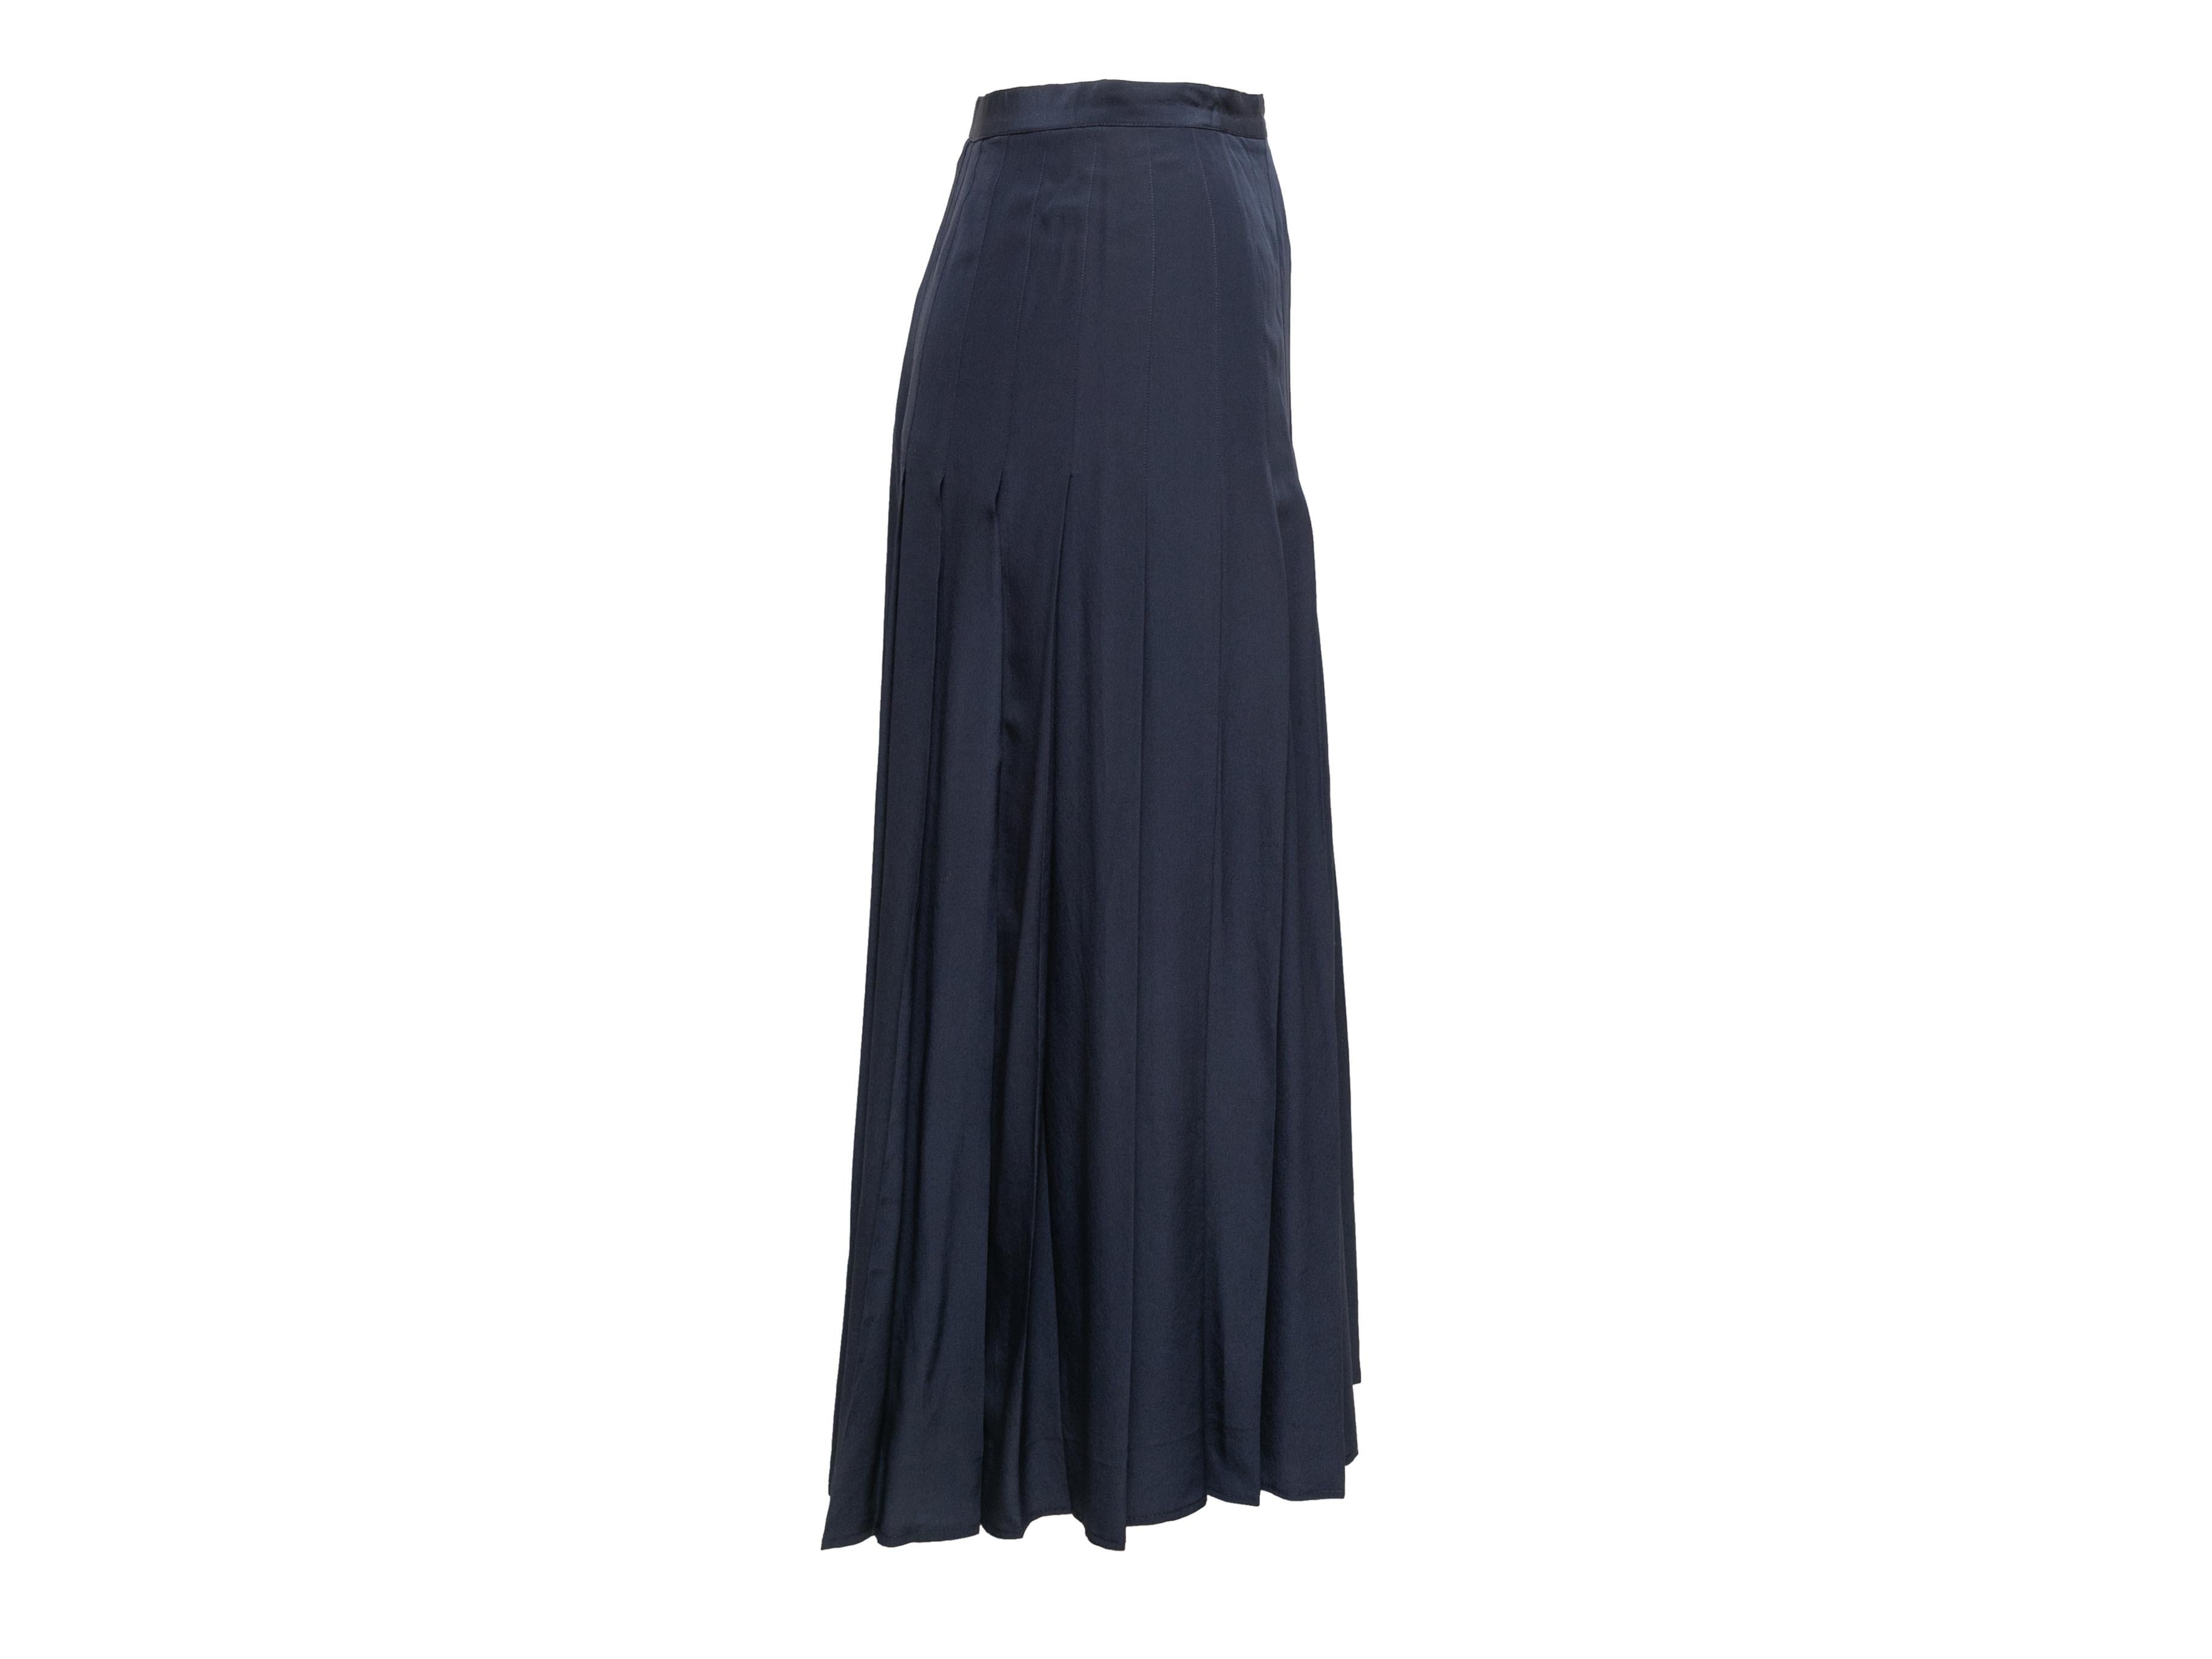 Vintage navy pleated silk maxi skirt by Chanel. 31